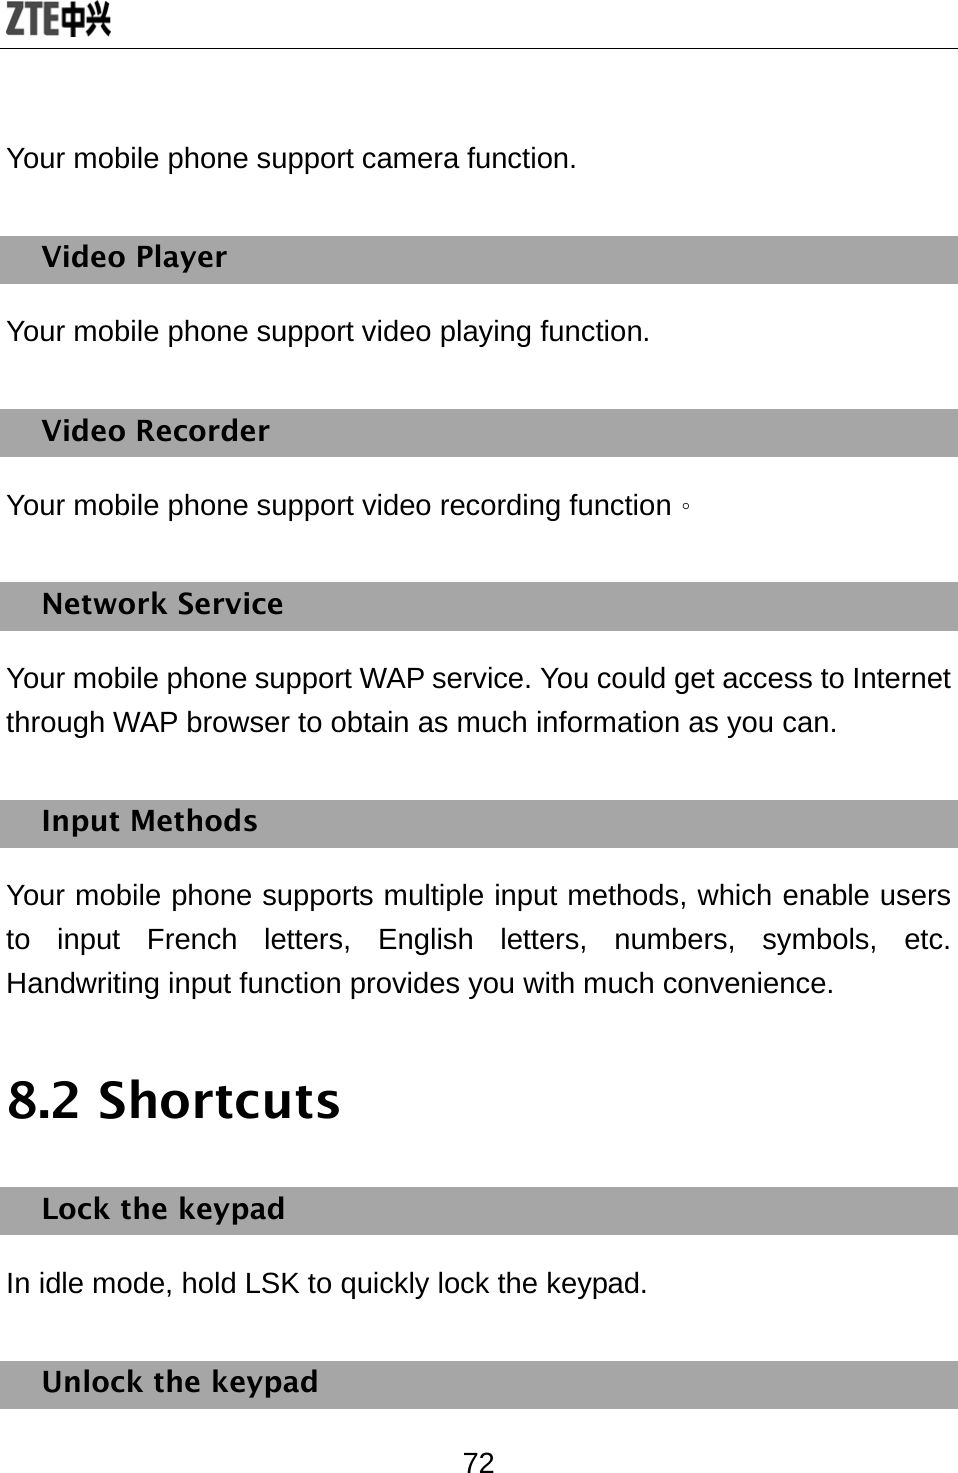  72 Your mobile phone support camera function.   Video Player Your mobile phone support video playing function. Video Recorder Your mobile phone support video recording function。 Network Service Your mobile phone support WAP service. You could get access to Internet through WAP browser to obtain as much information as you can. Input Methods Your mobile phone supports multiple input methods, which enable users to input French letters, English letters, numbers, symbols, etc. Handwriting input function provides you with much convenience. 8.2 Shortcuts Lock the keypad In idle mode, hold LSK to quickly lock the keypad. Unlock the keypad 